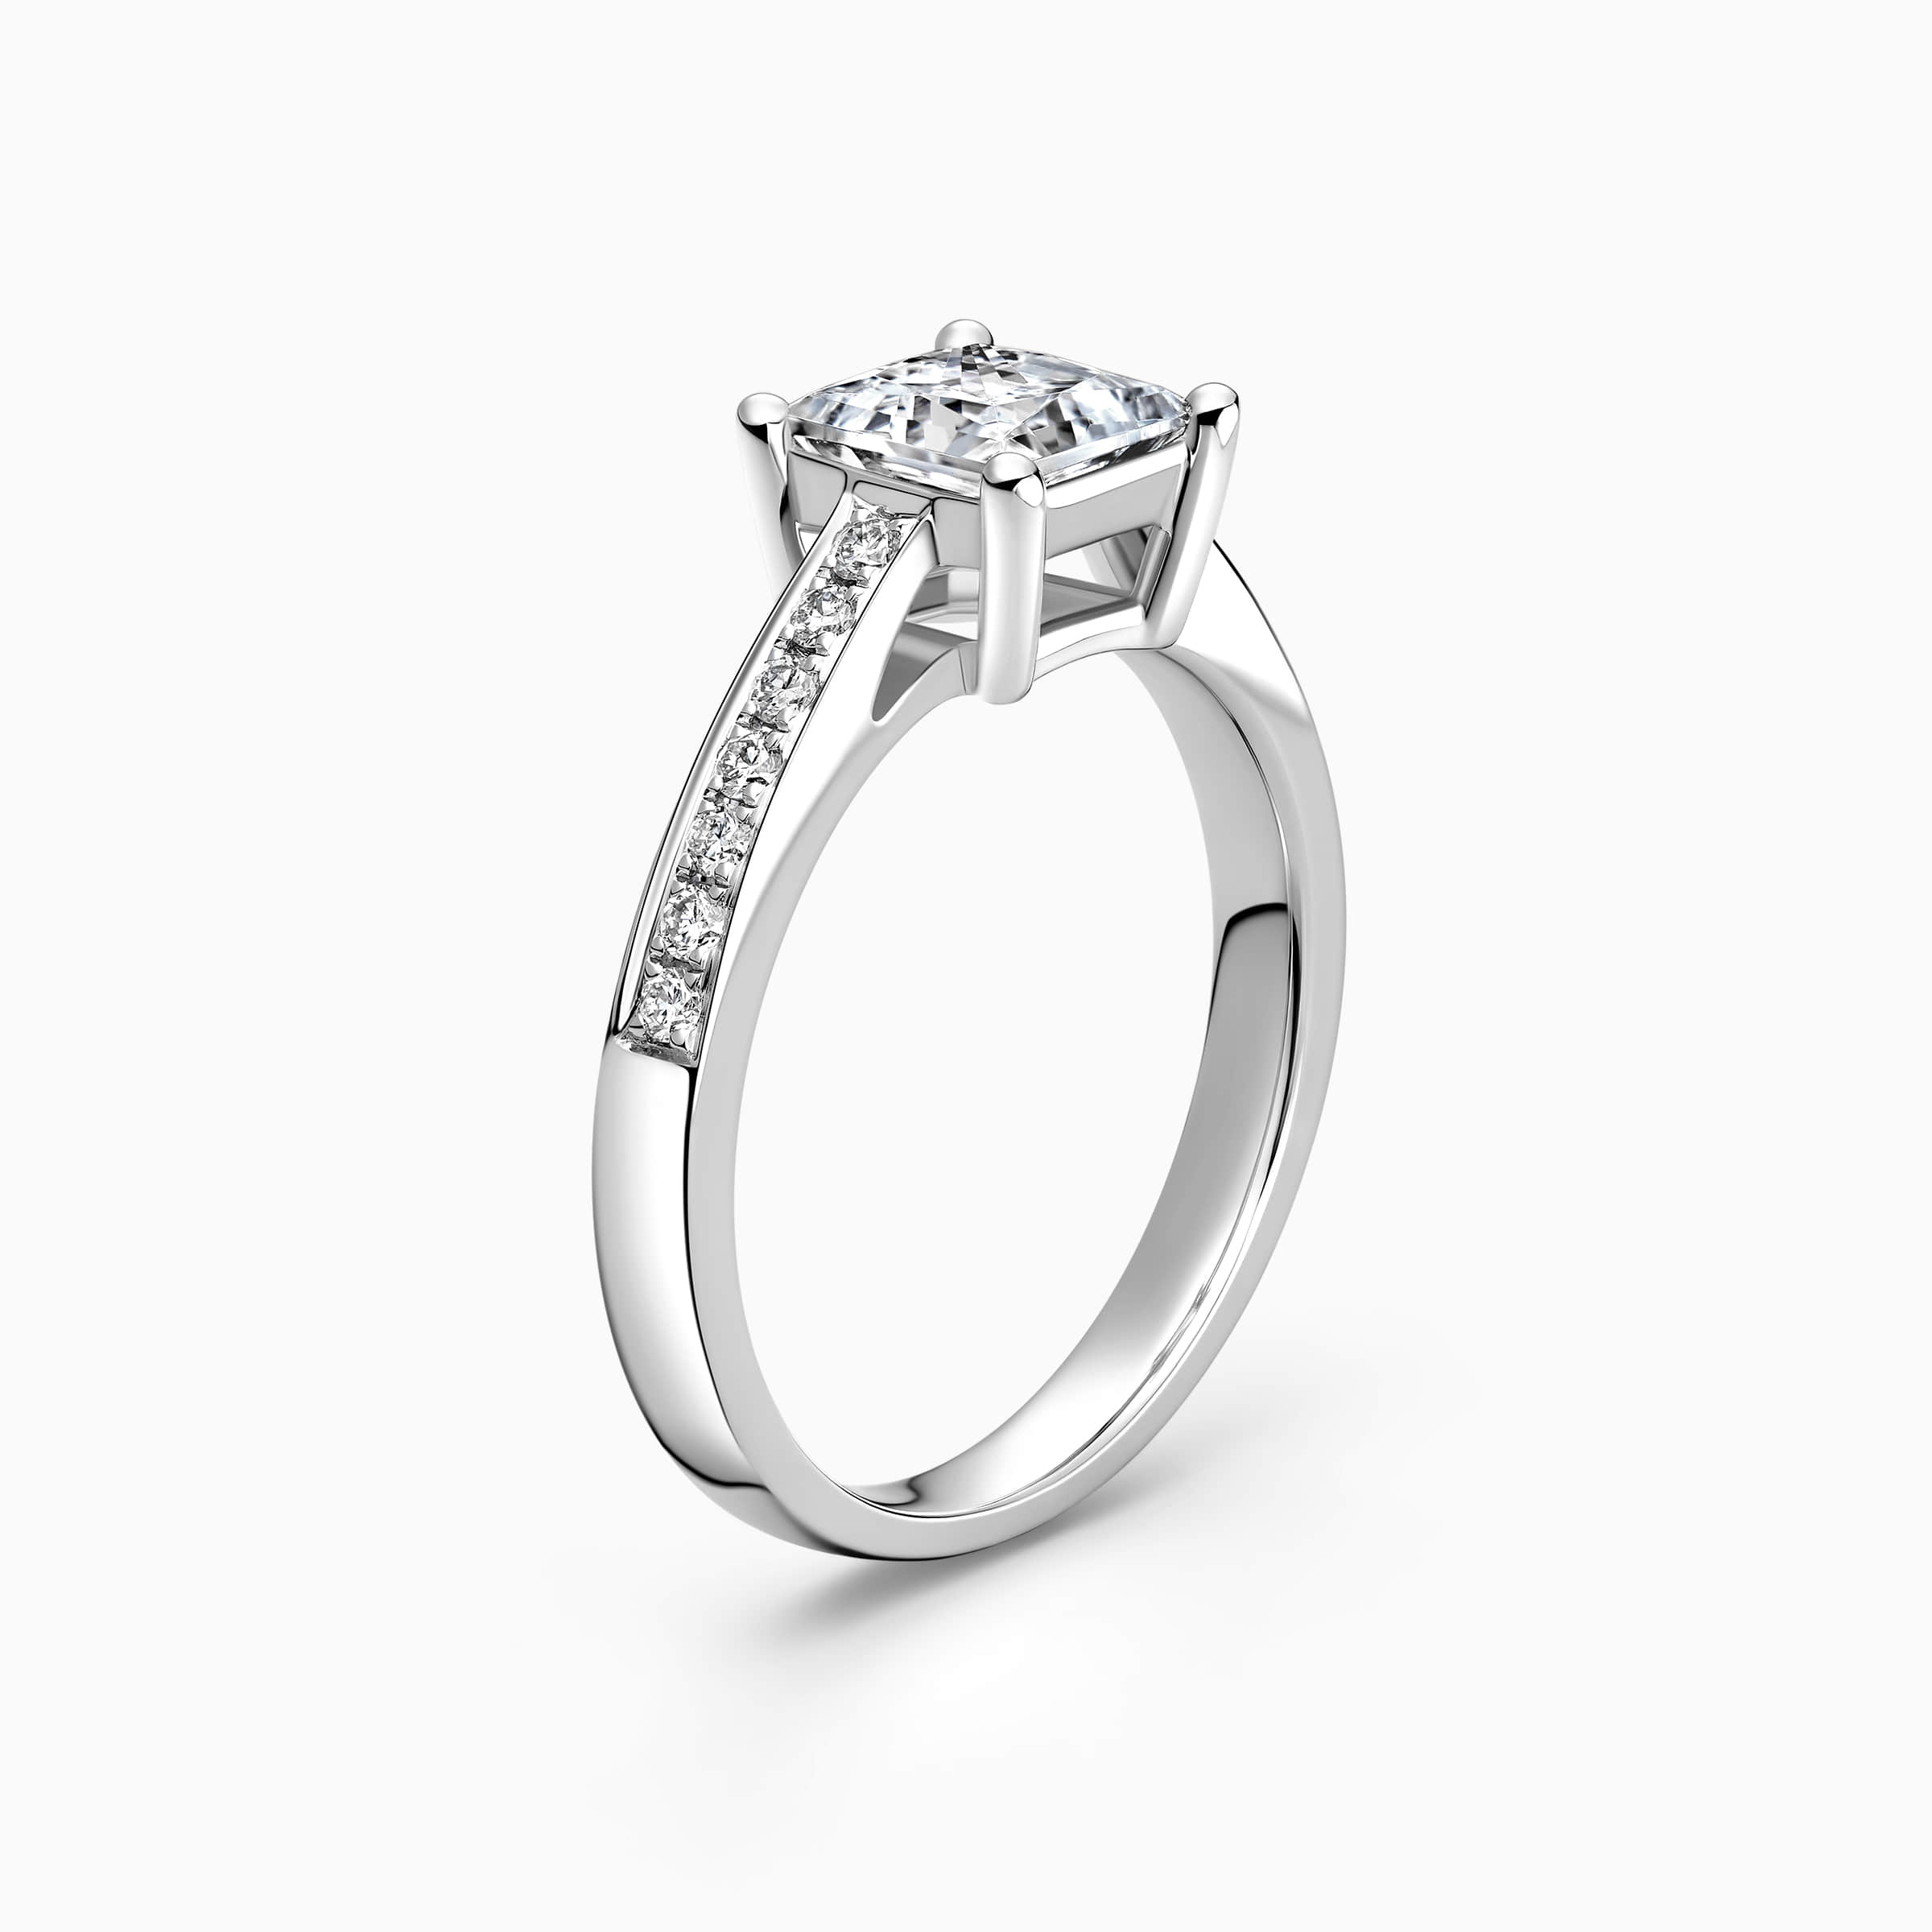 Darry Ring princess cut promise ring angle view